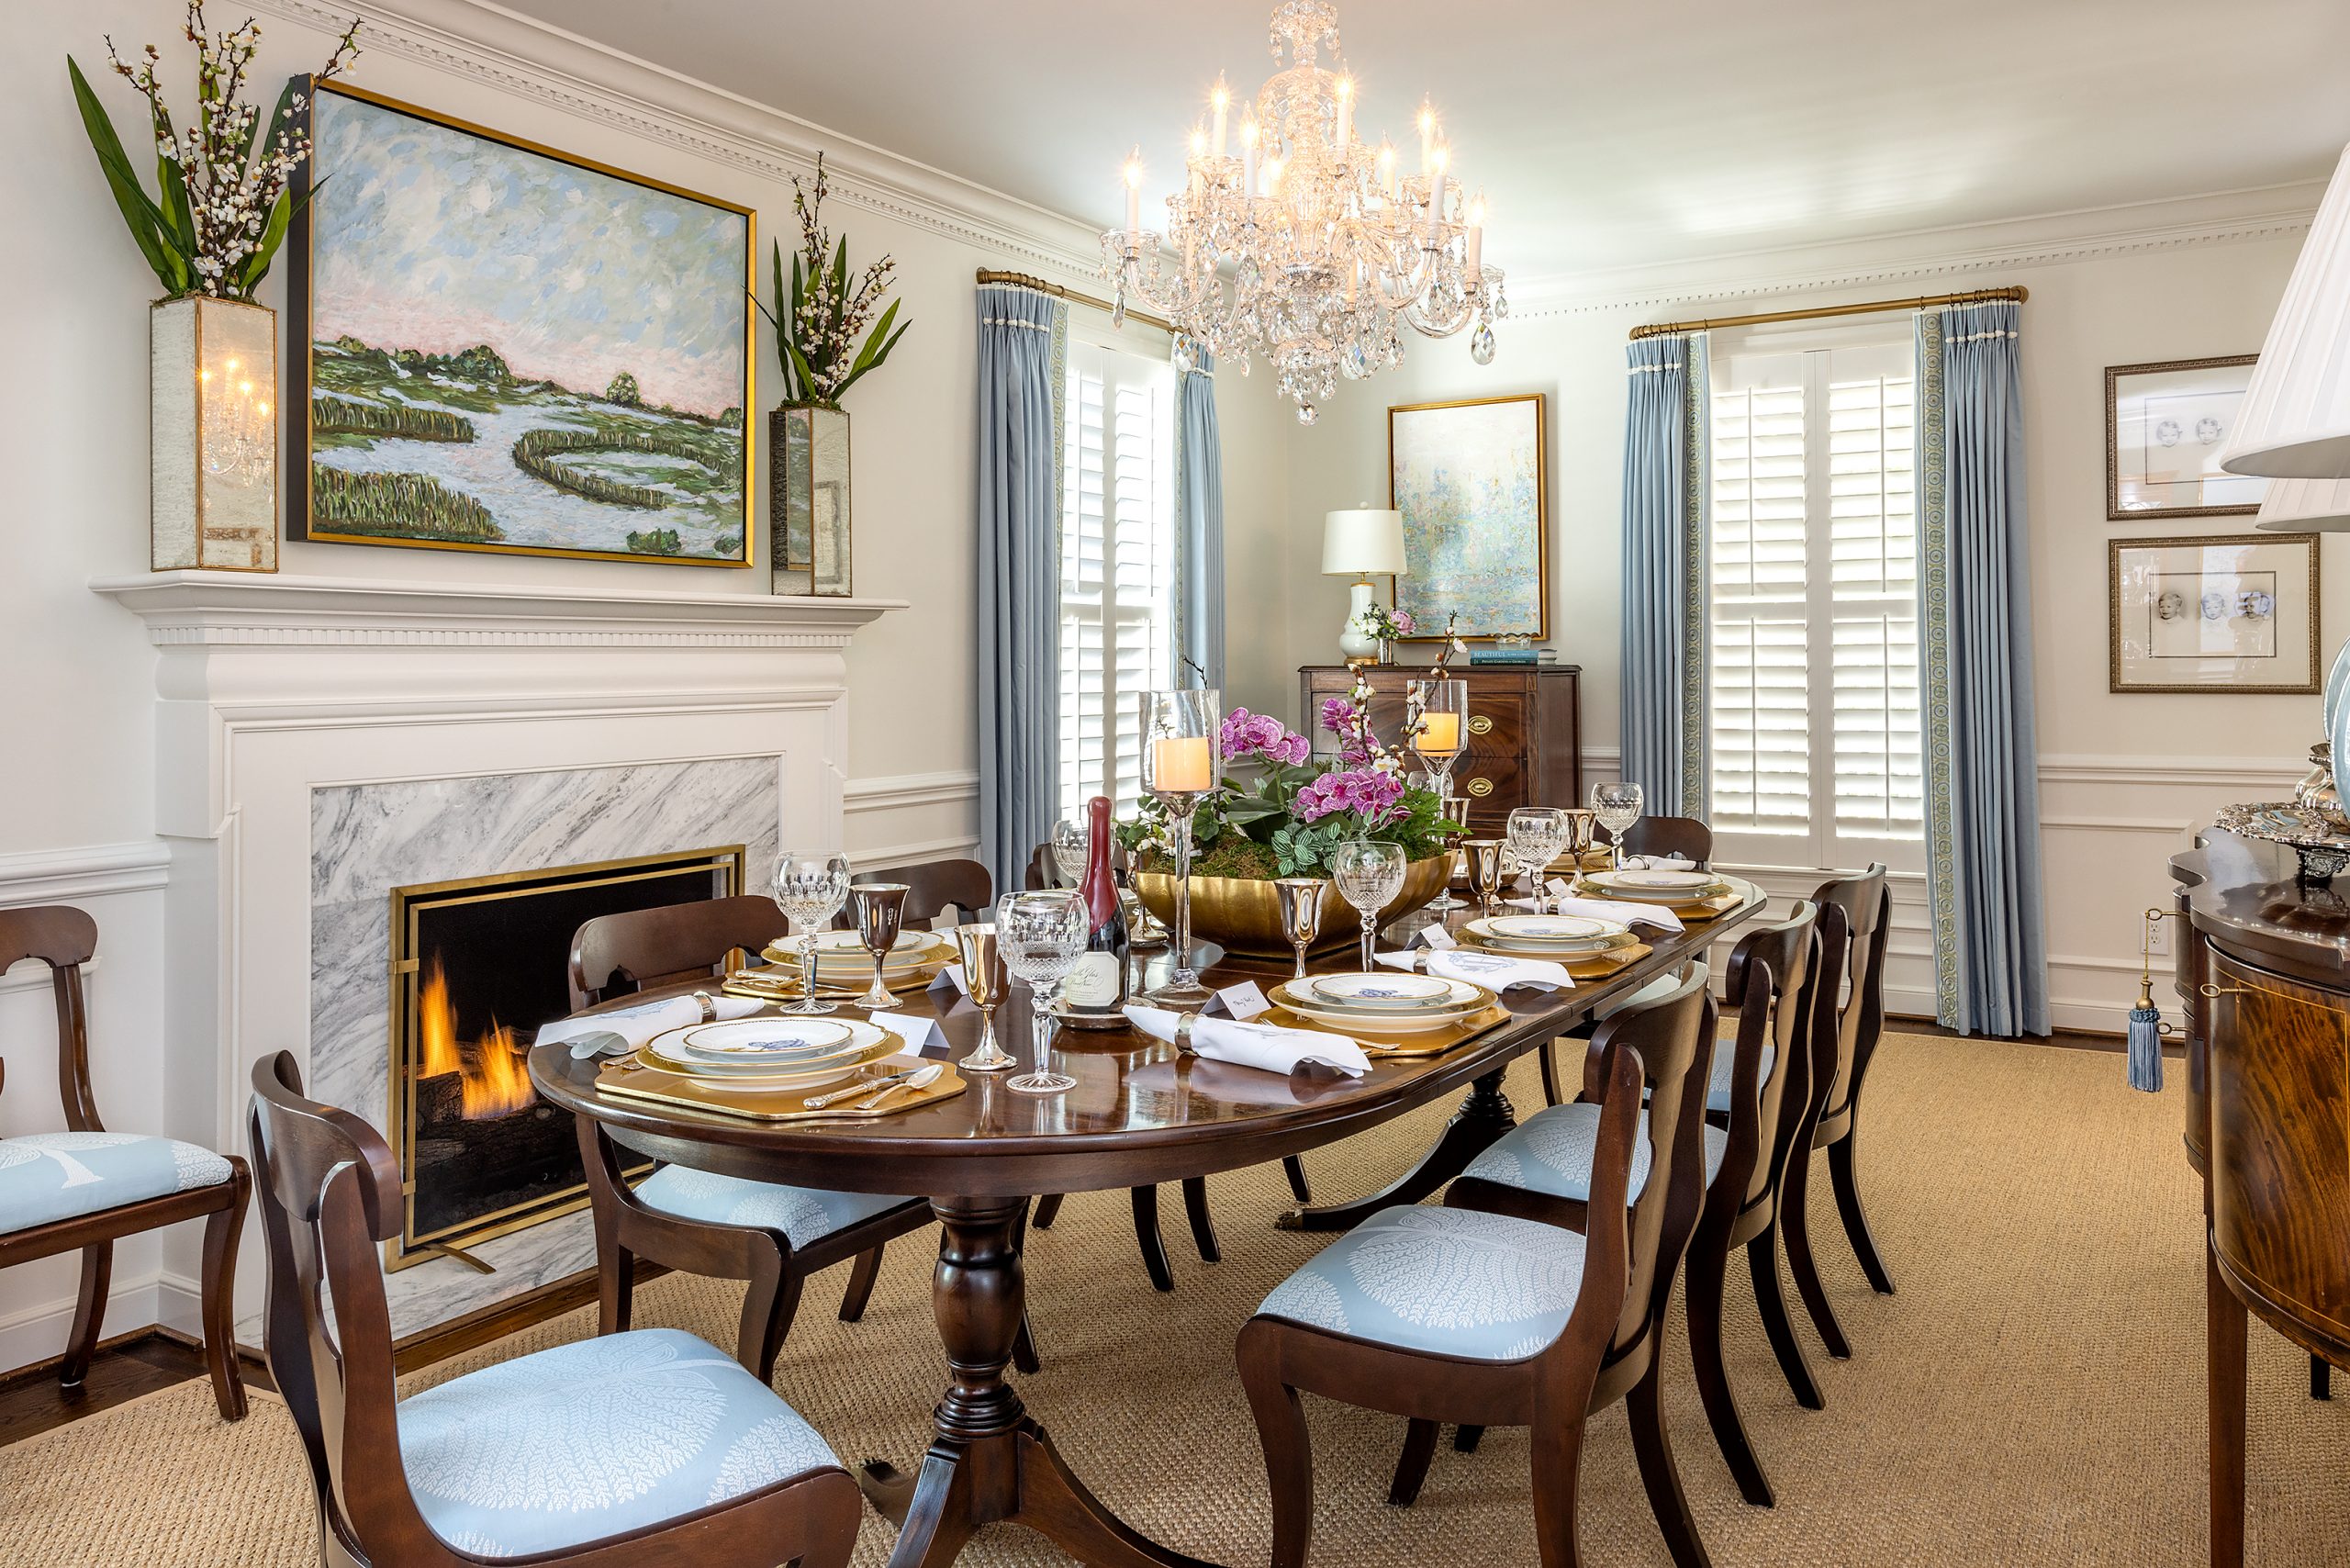 When the Andersons purchased their home in 2019, the original dining room was a small space, so their designer, Elizabeth Newman of Charleston, had the idea to flip the original living room with the dining room. To make the new dining room more elegant, they added wainscoting and heavy molding, along with a large hand-cut crystal chandelier. Mary Kirk inherited her grandmother’s large oval mahogany inlaid Virginia Galleries dining room table, sideboard, and dining chairs. The room holds them graciously.